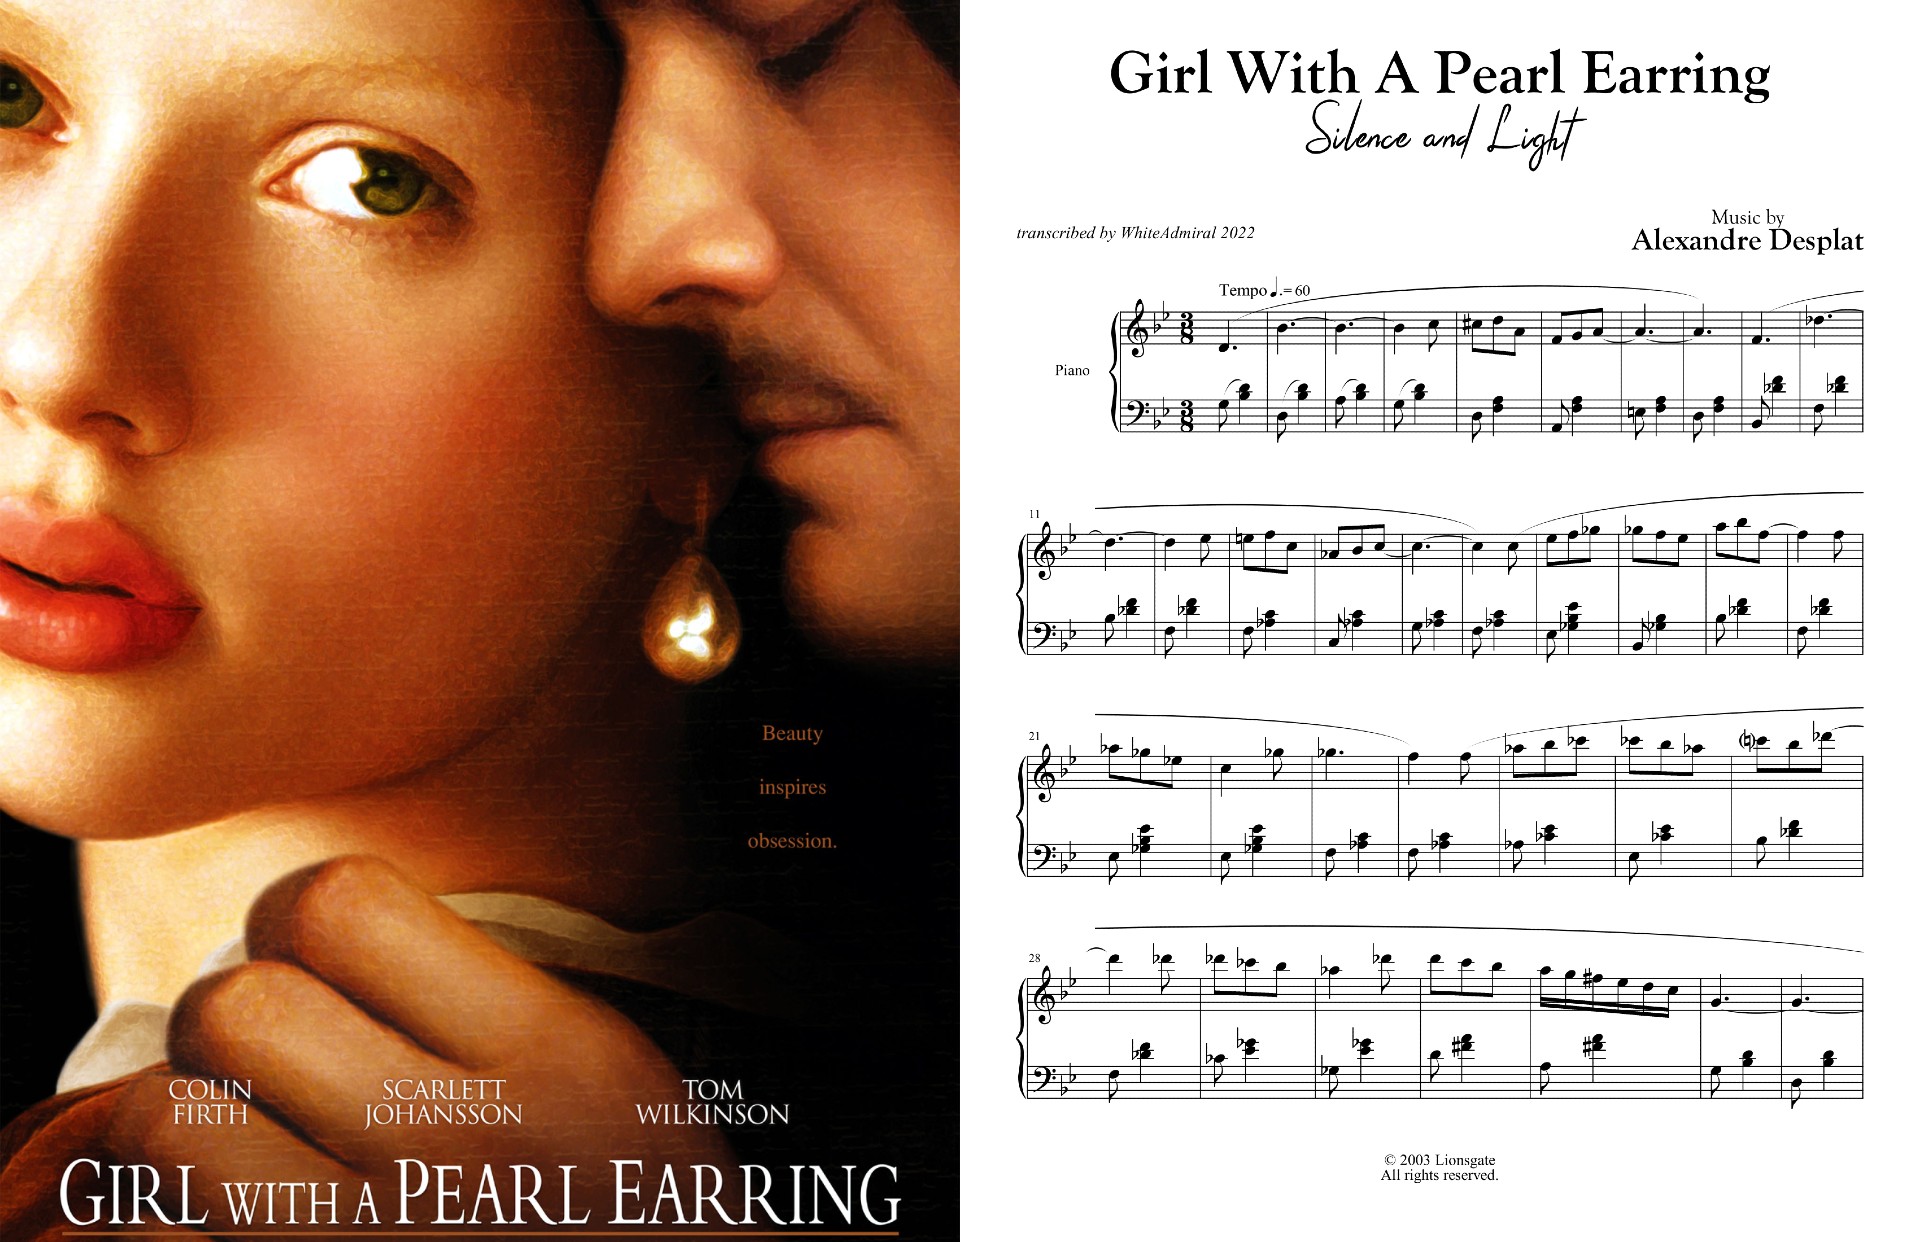 GIRL WITH A PEARL EARRING - Silence and Light.jpg